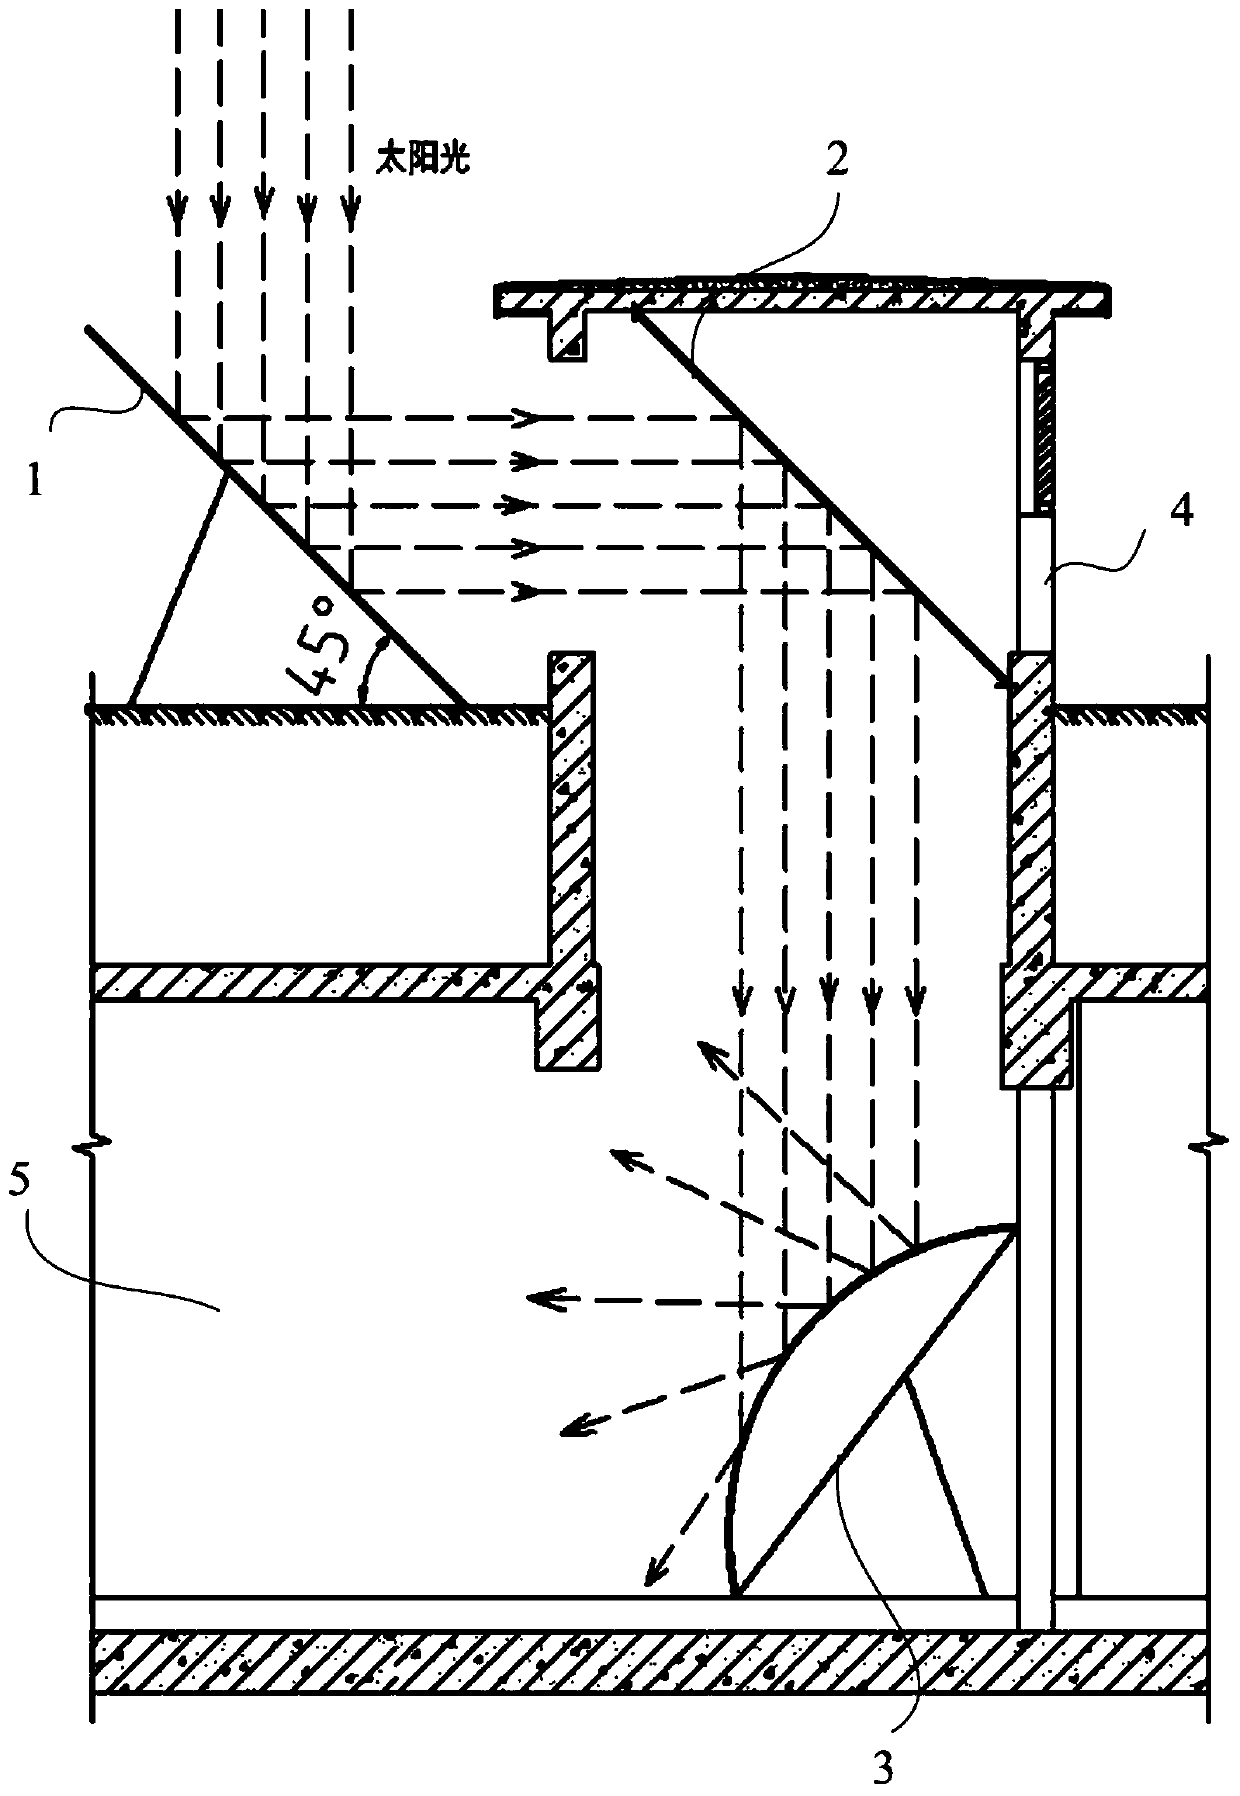 Lighting compensation device for basement construction, and construction method